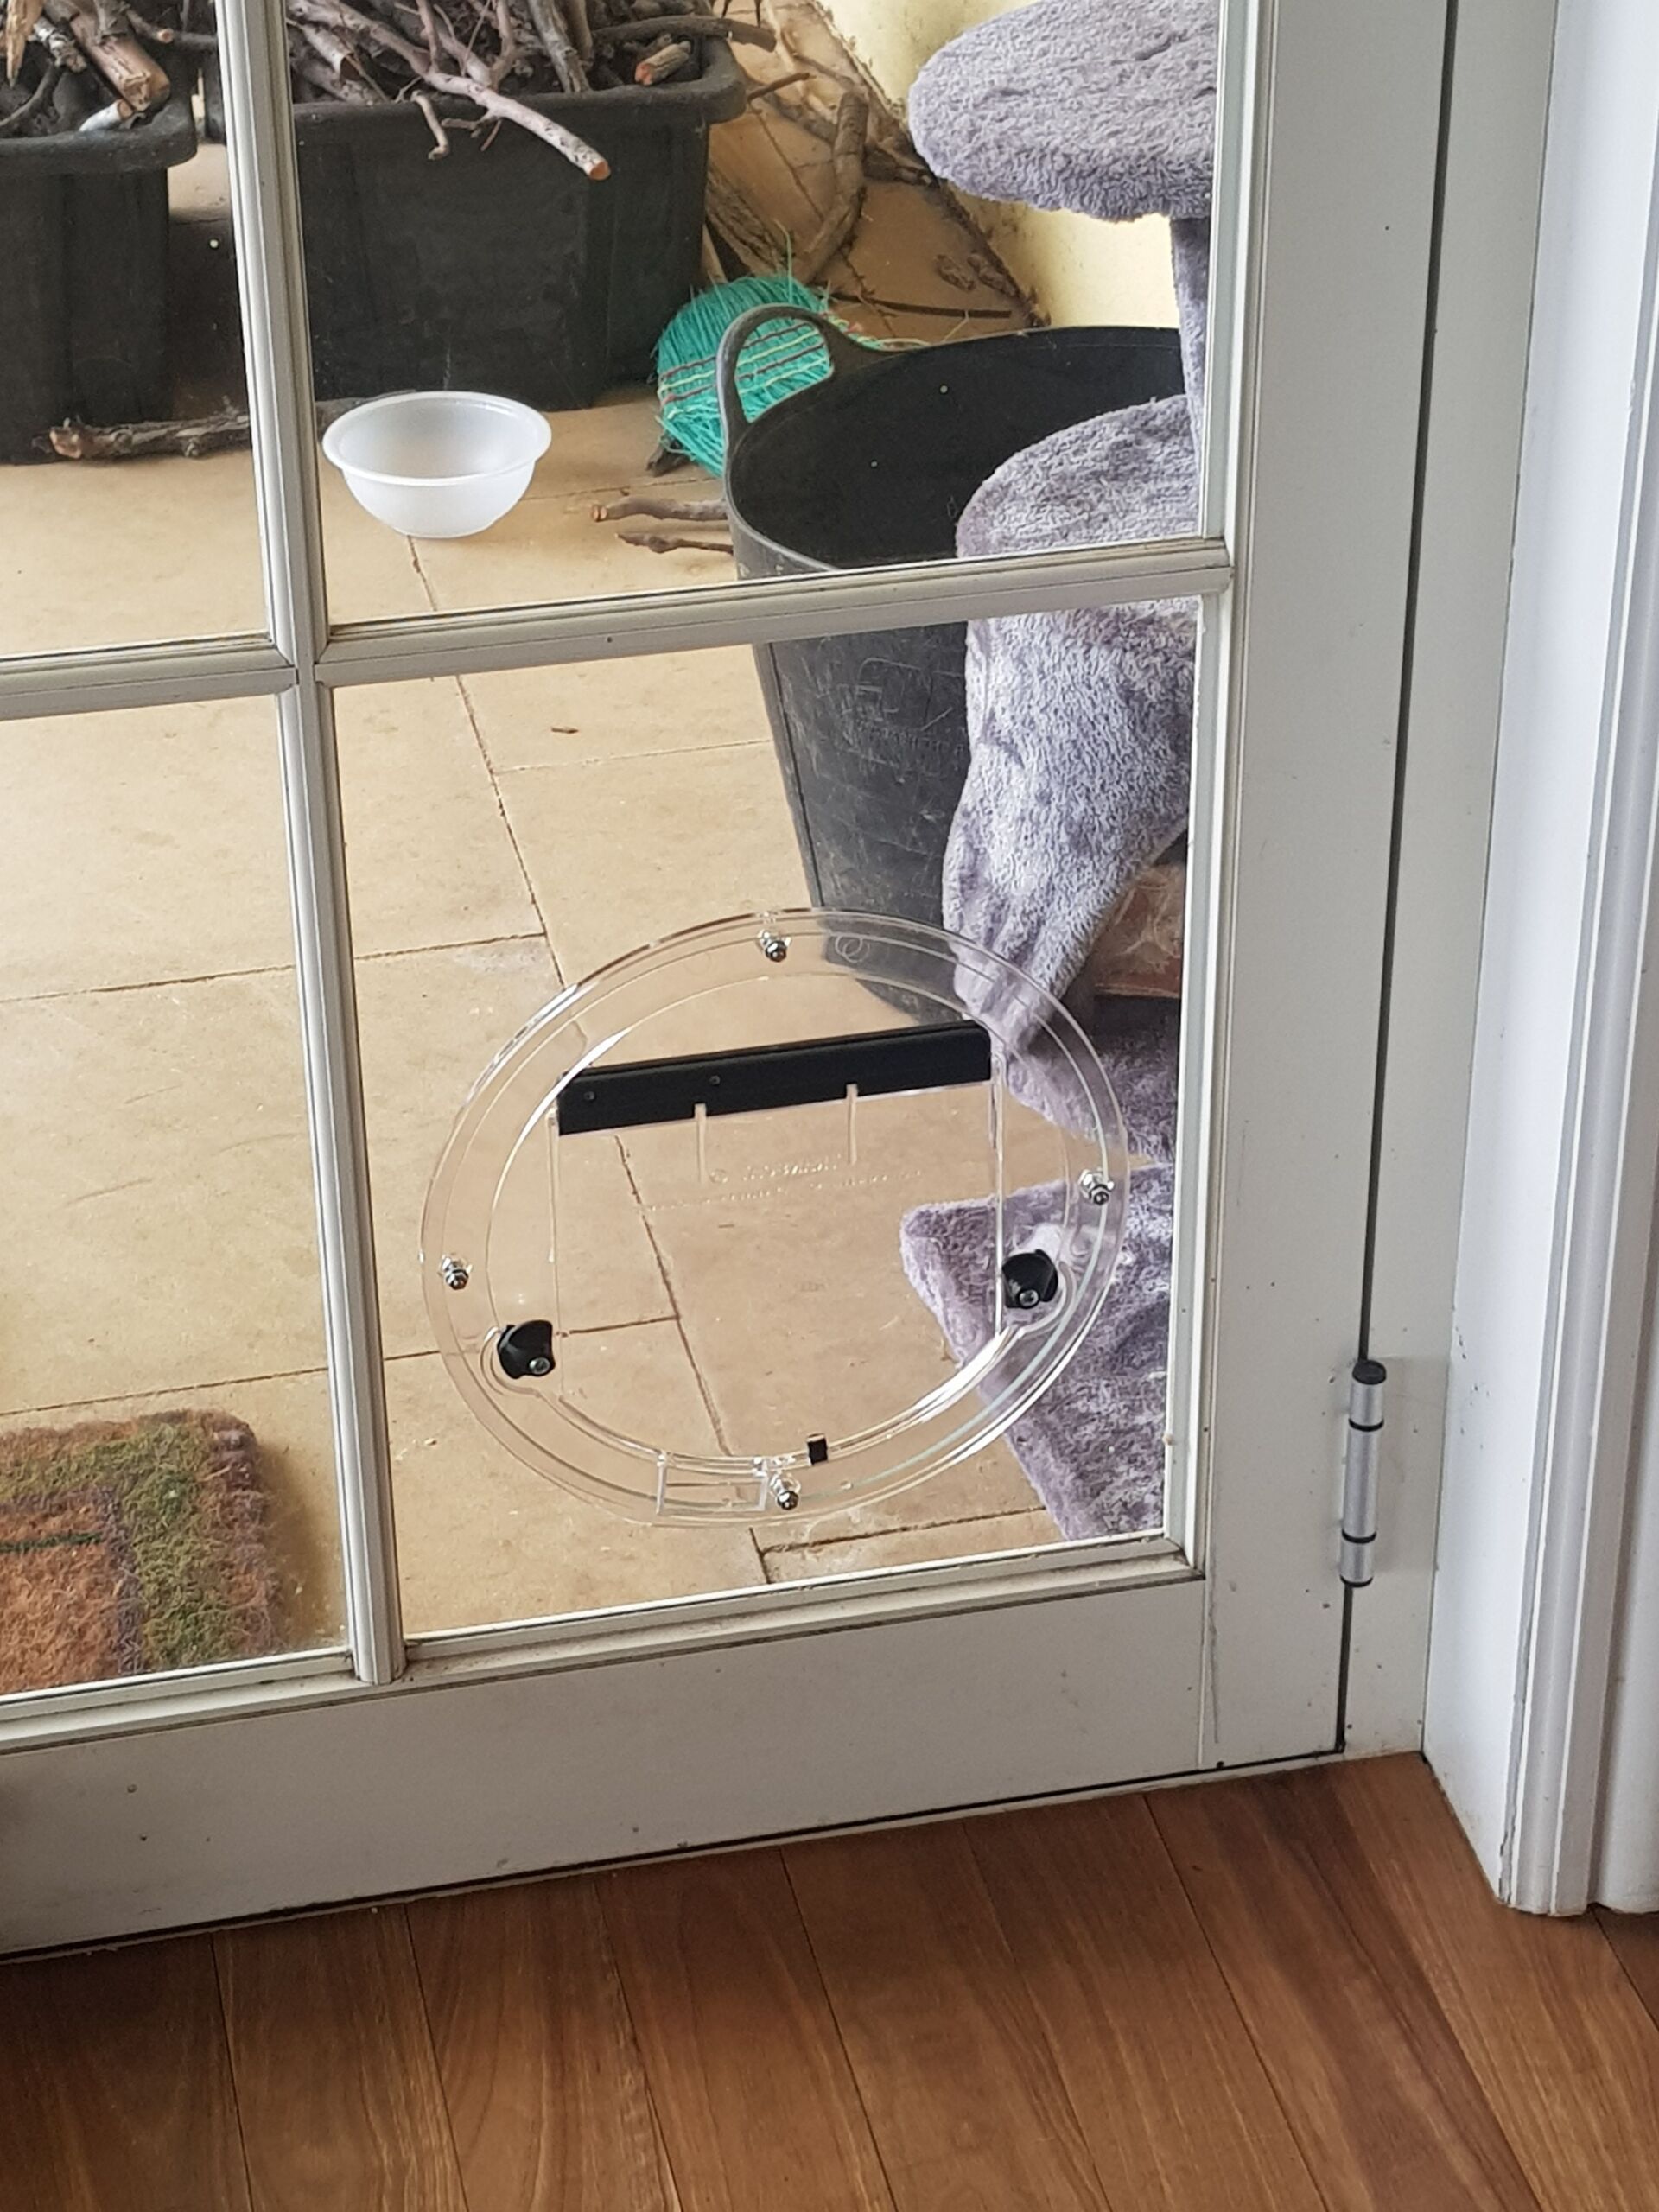 Door Glass Repair - Glazier in the Southern Highlands